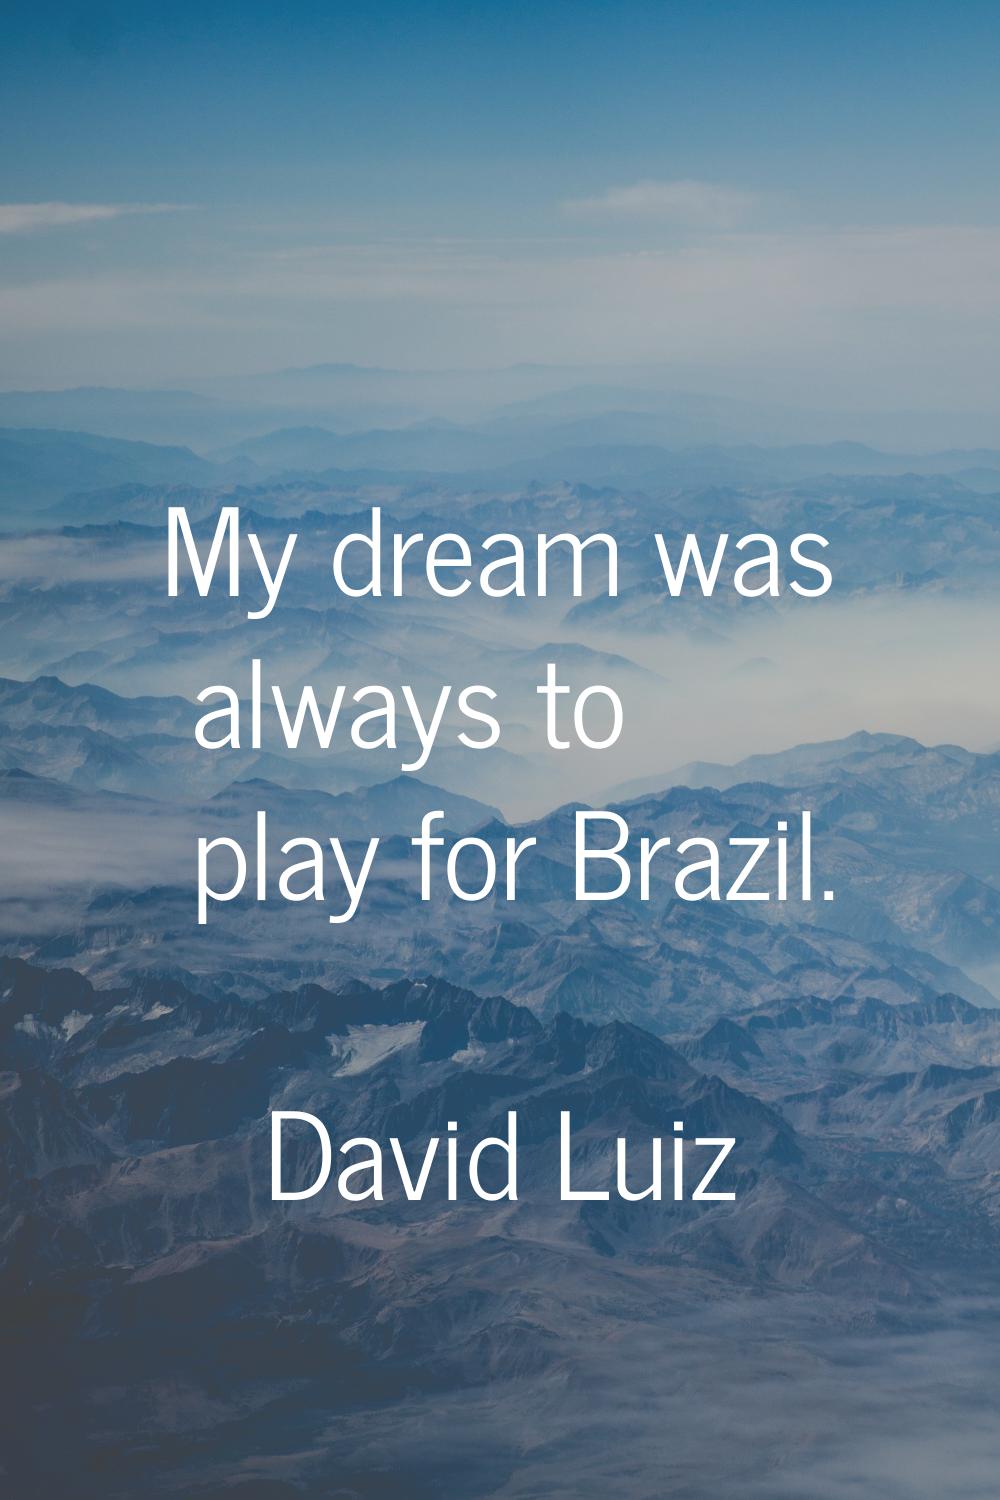 My dream was always to play for Brazil.